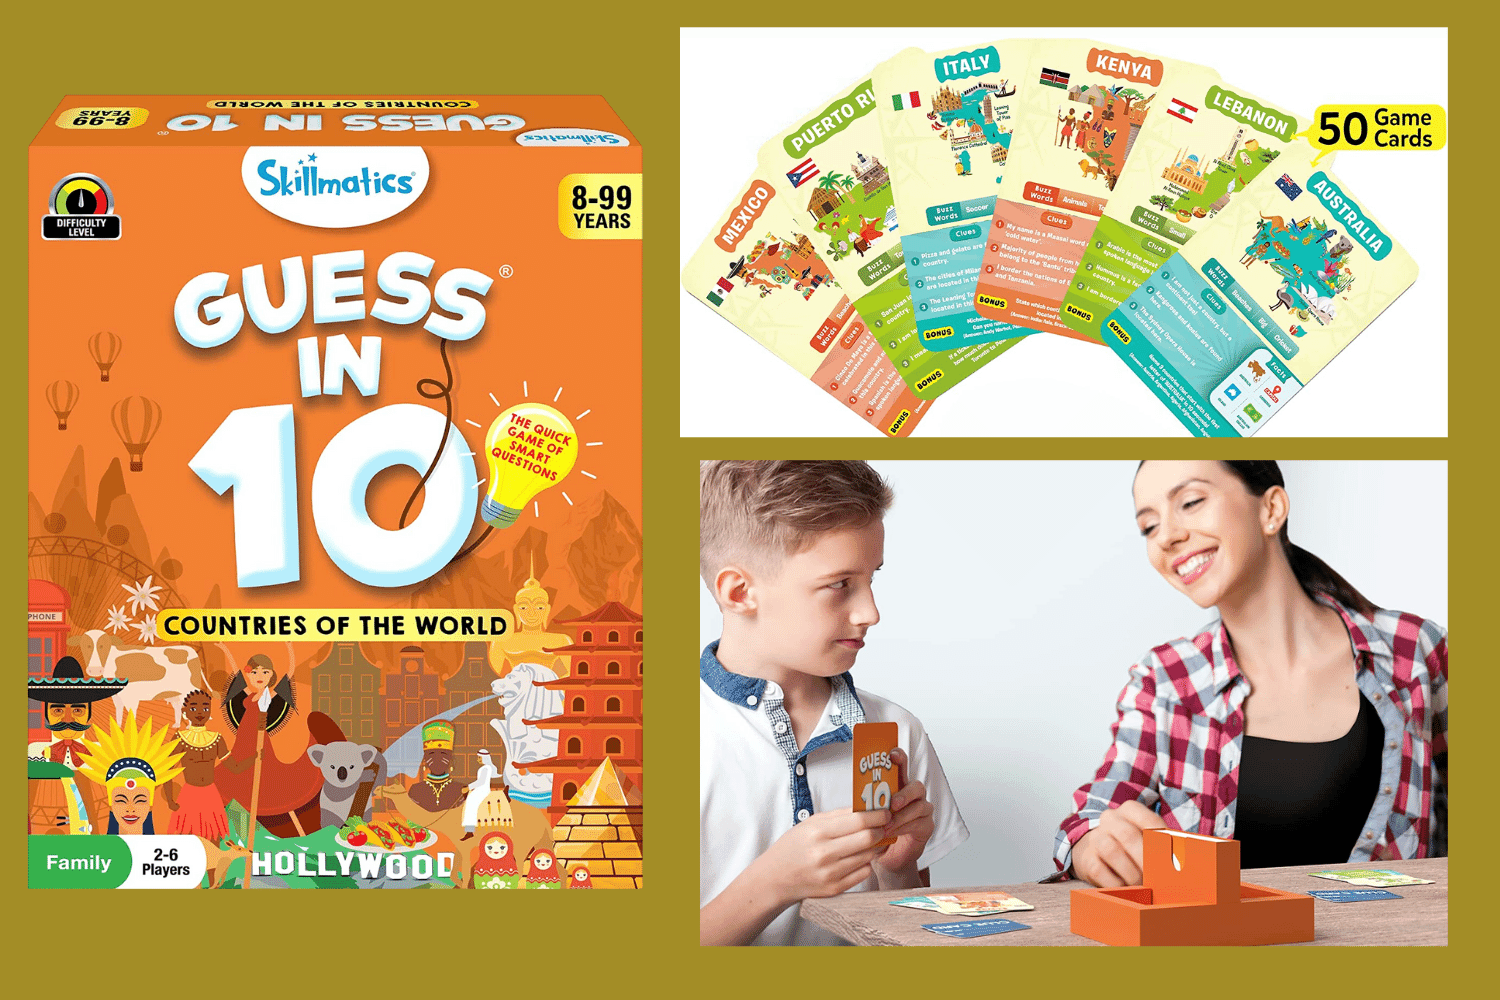 Skillmatics Card Game Guess 10 Countries In The World 